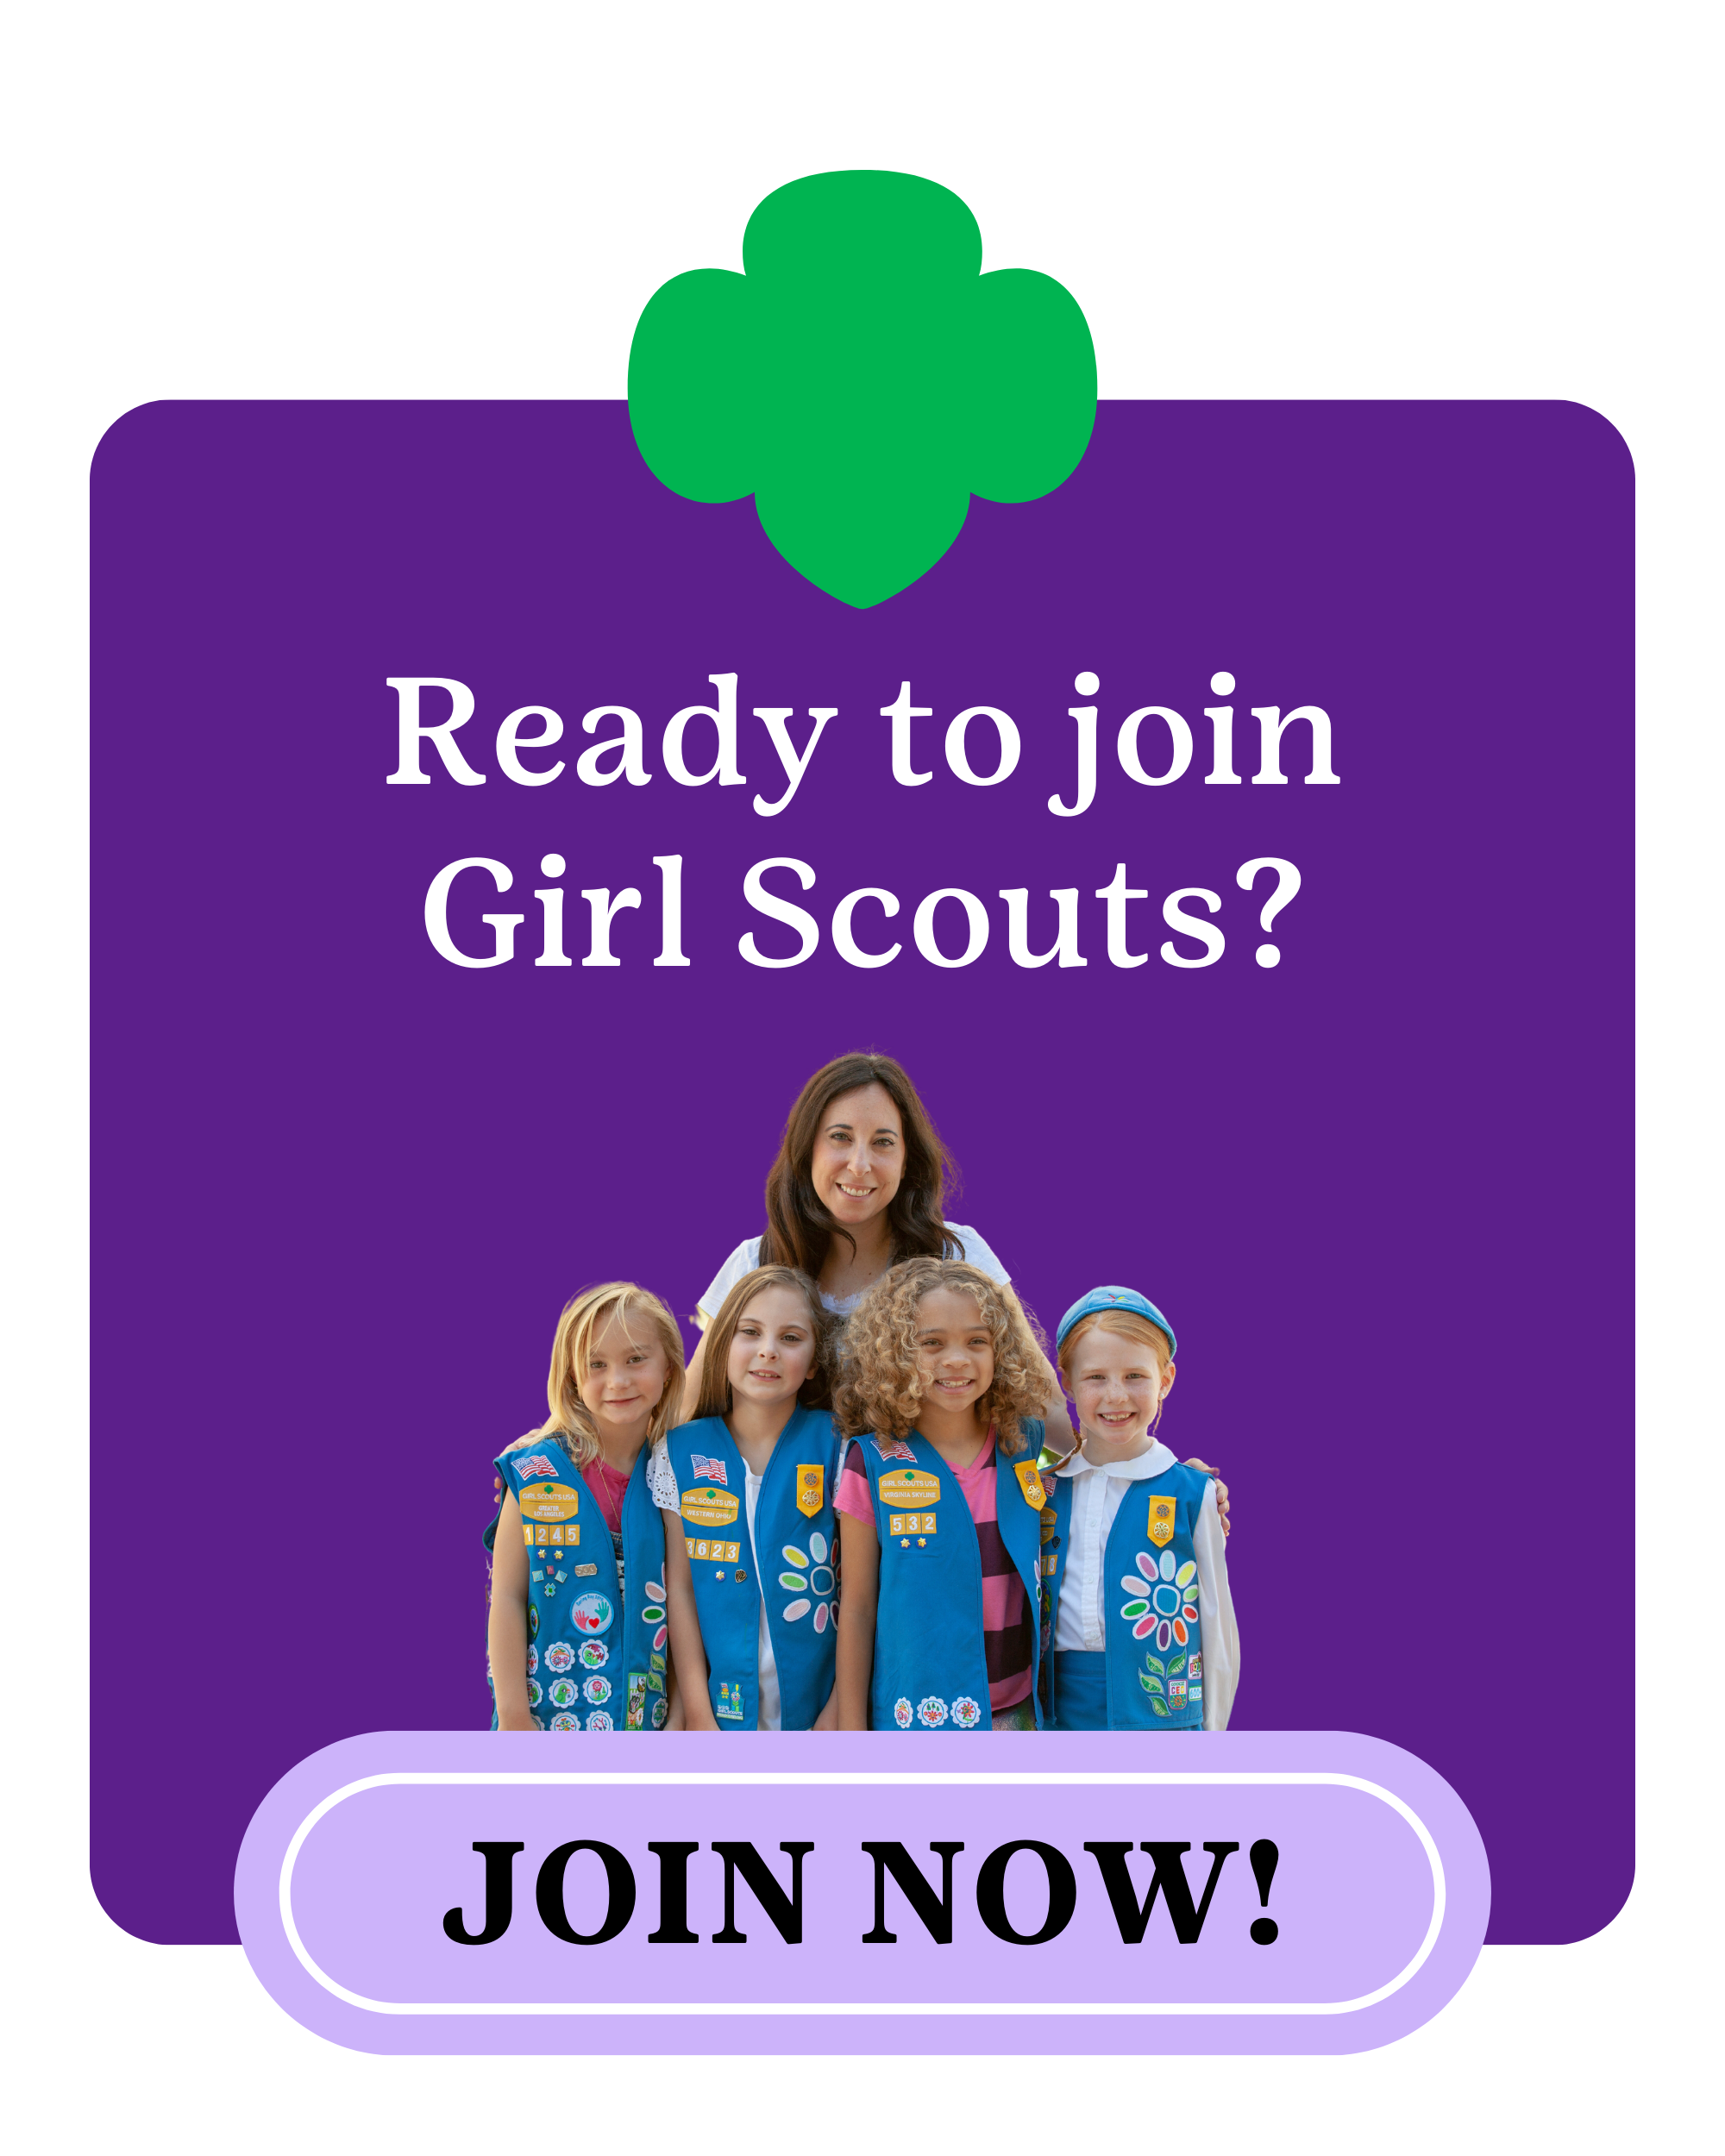 Ready to explore Girl Scouts? Join Today!